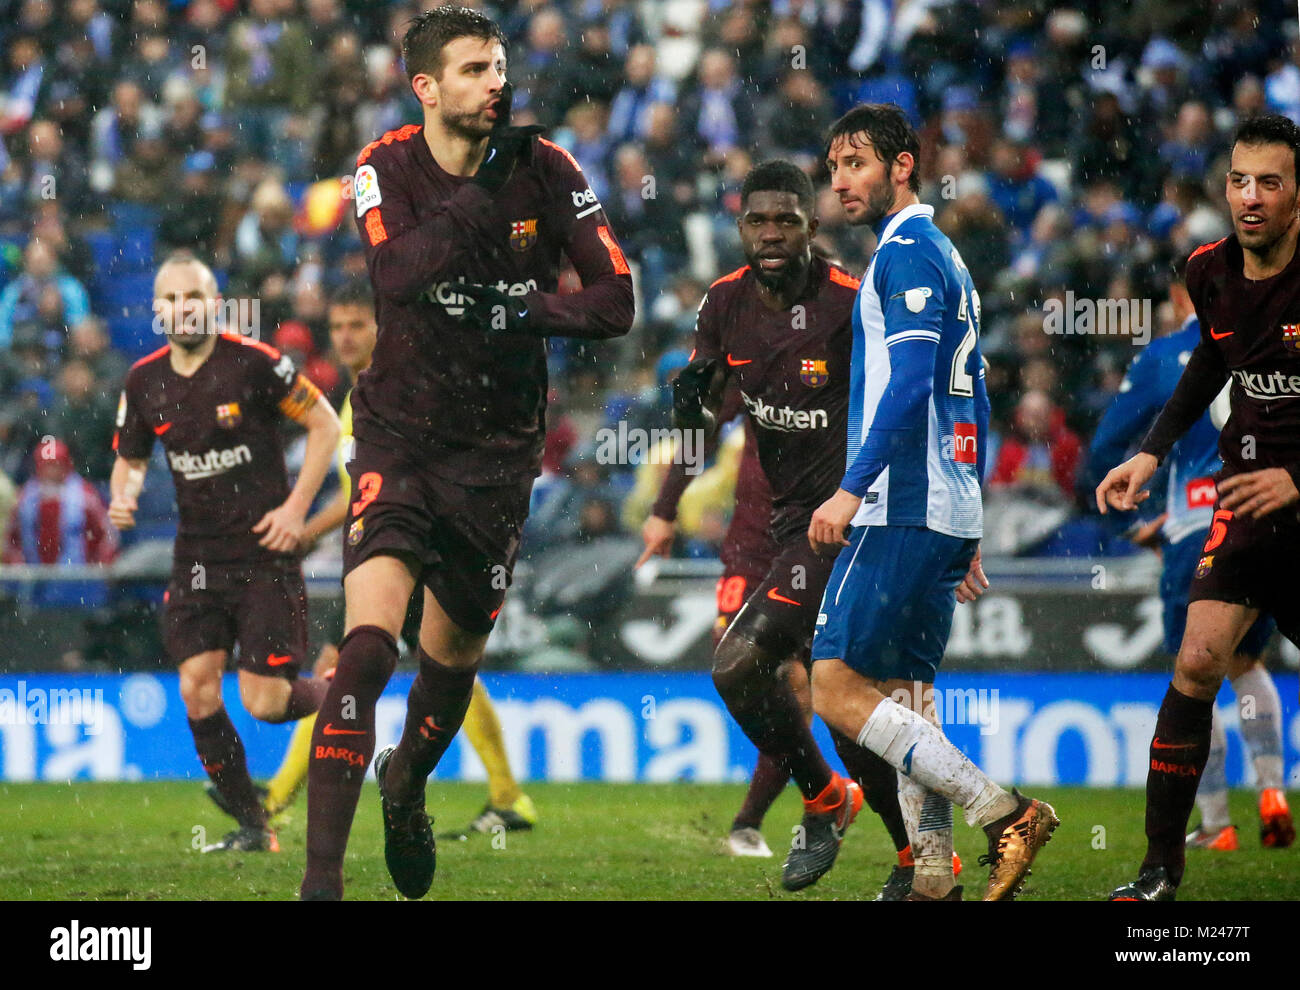 Barcelona, Spain. 01st Feb, 2018. Gerard Pique goal celebration during the match between RCD Espanyol vs FC Barcelona, for the round 22 of the Liga Santander, played at Cornella -El Prat Stadium on 3th February 2018 in Barcelona, Spain. Credit: Gtres Información más Comuniación on line, S.L./Alamy Live News Stock Photo